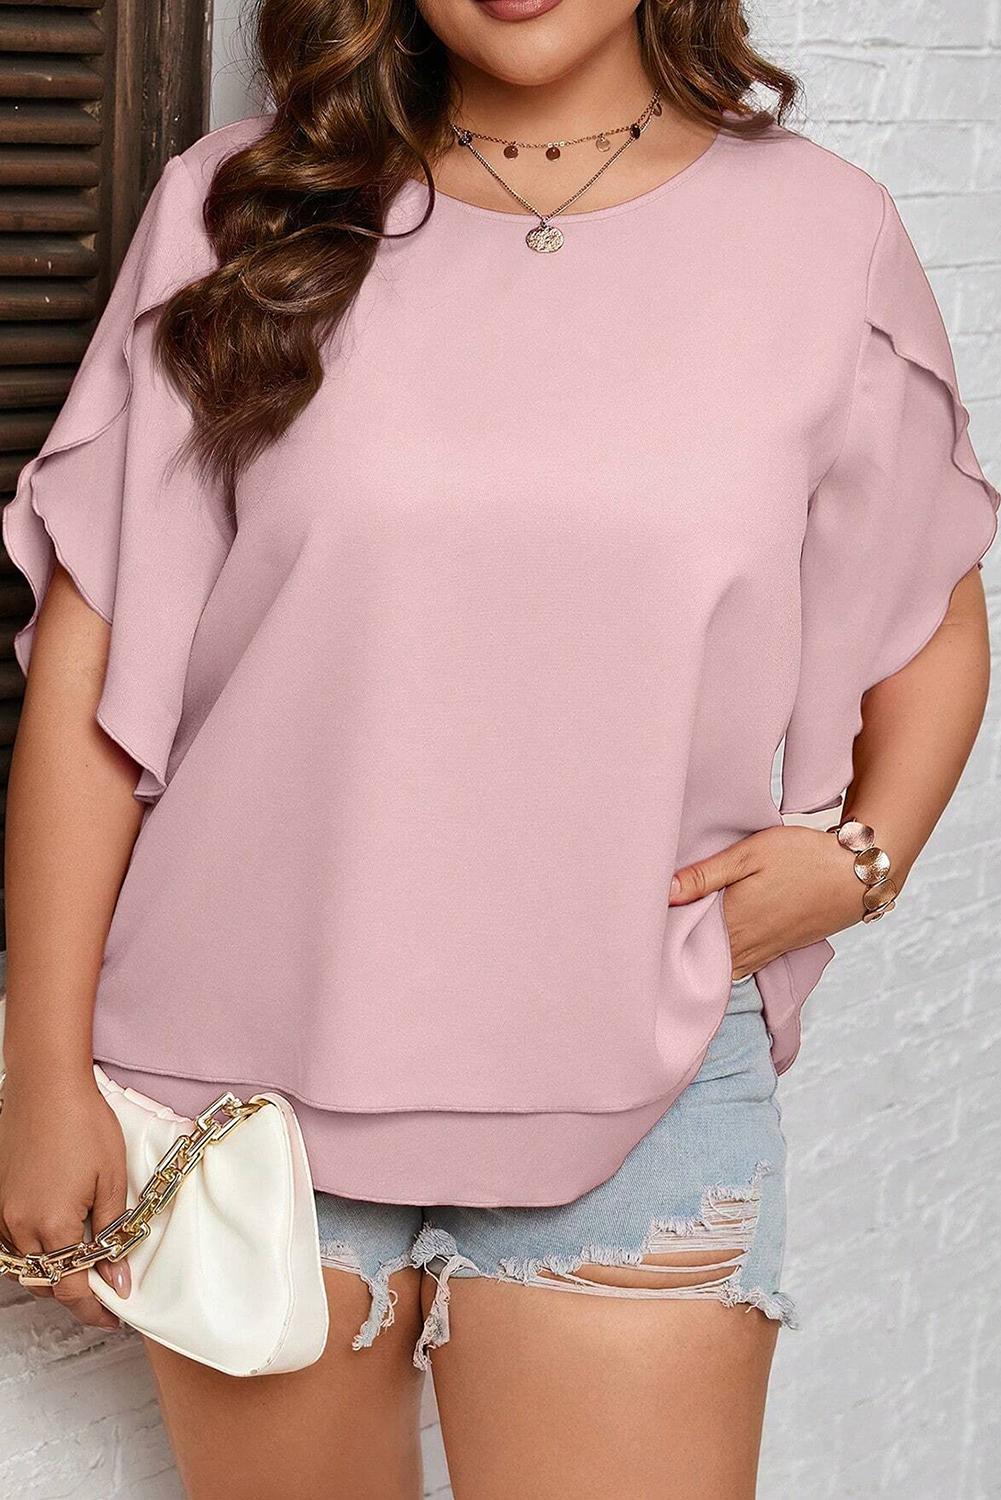 Shewin Wholesale LADY Light Pink Plus Size Frilly Overlap Sleeve Double Layered Blouse